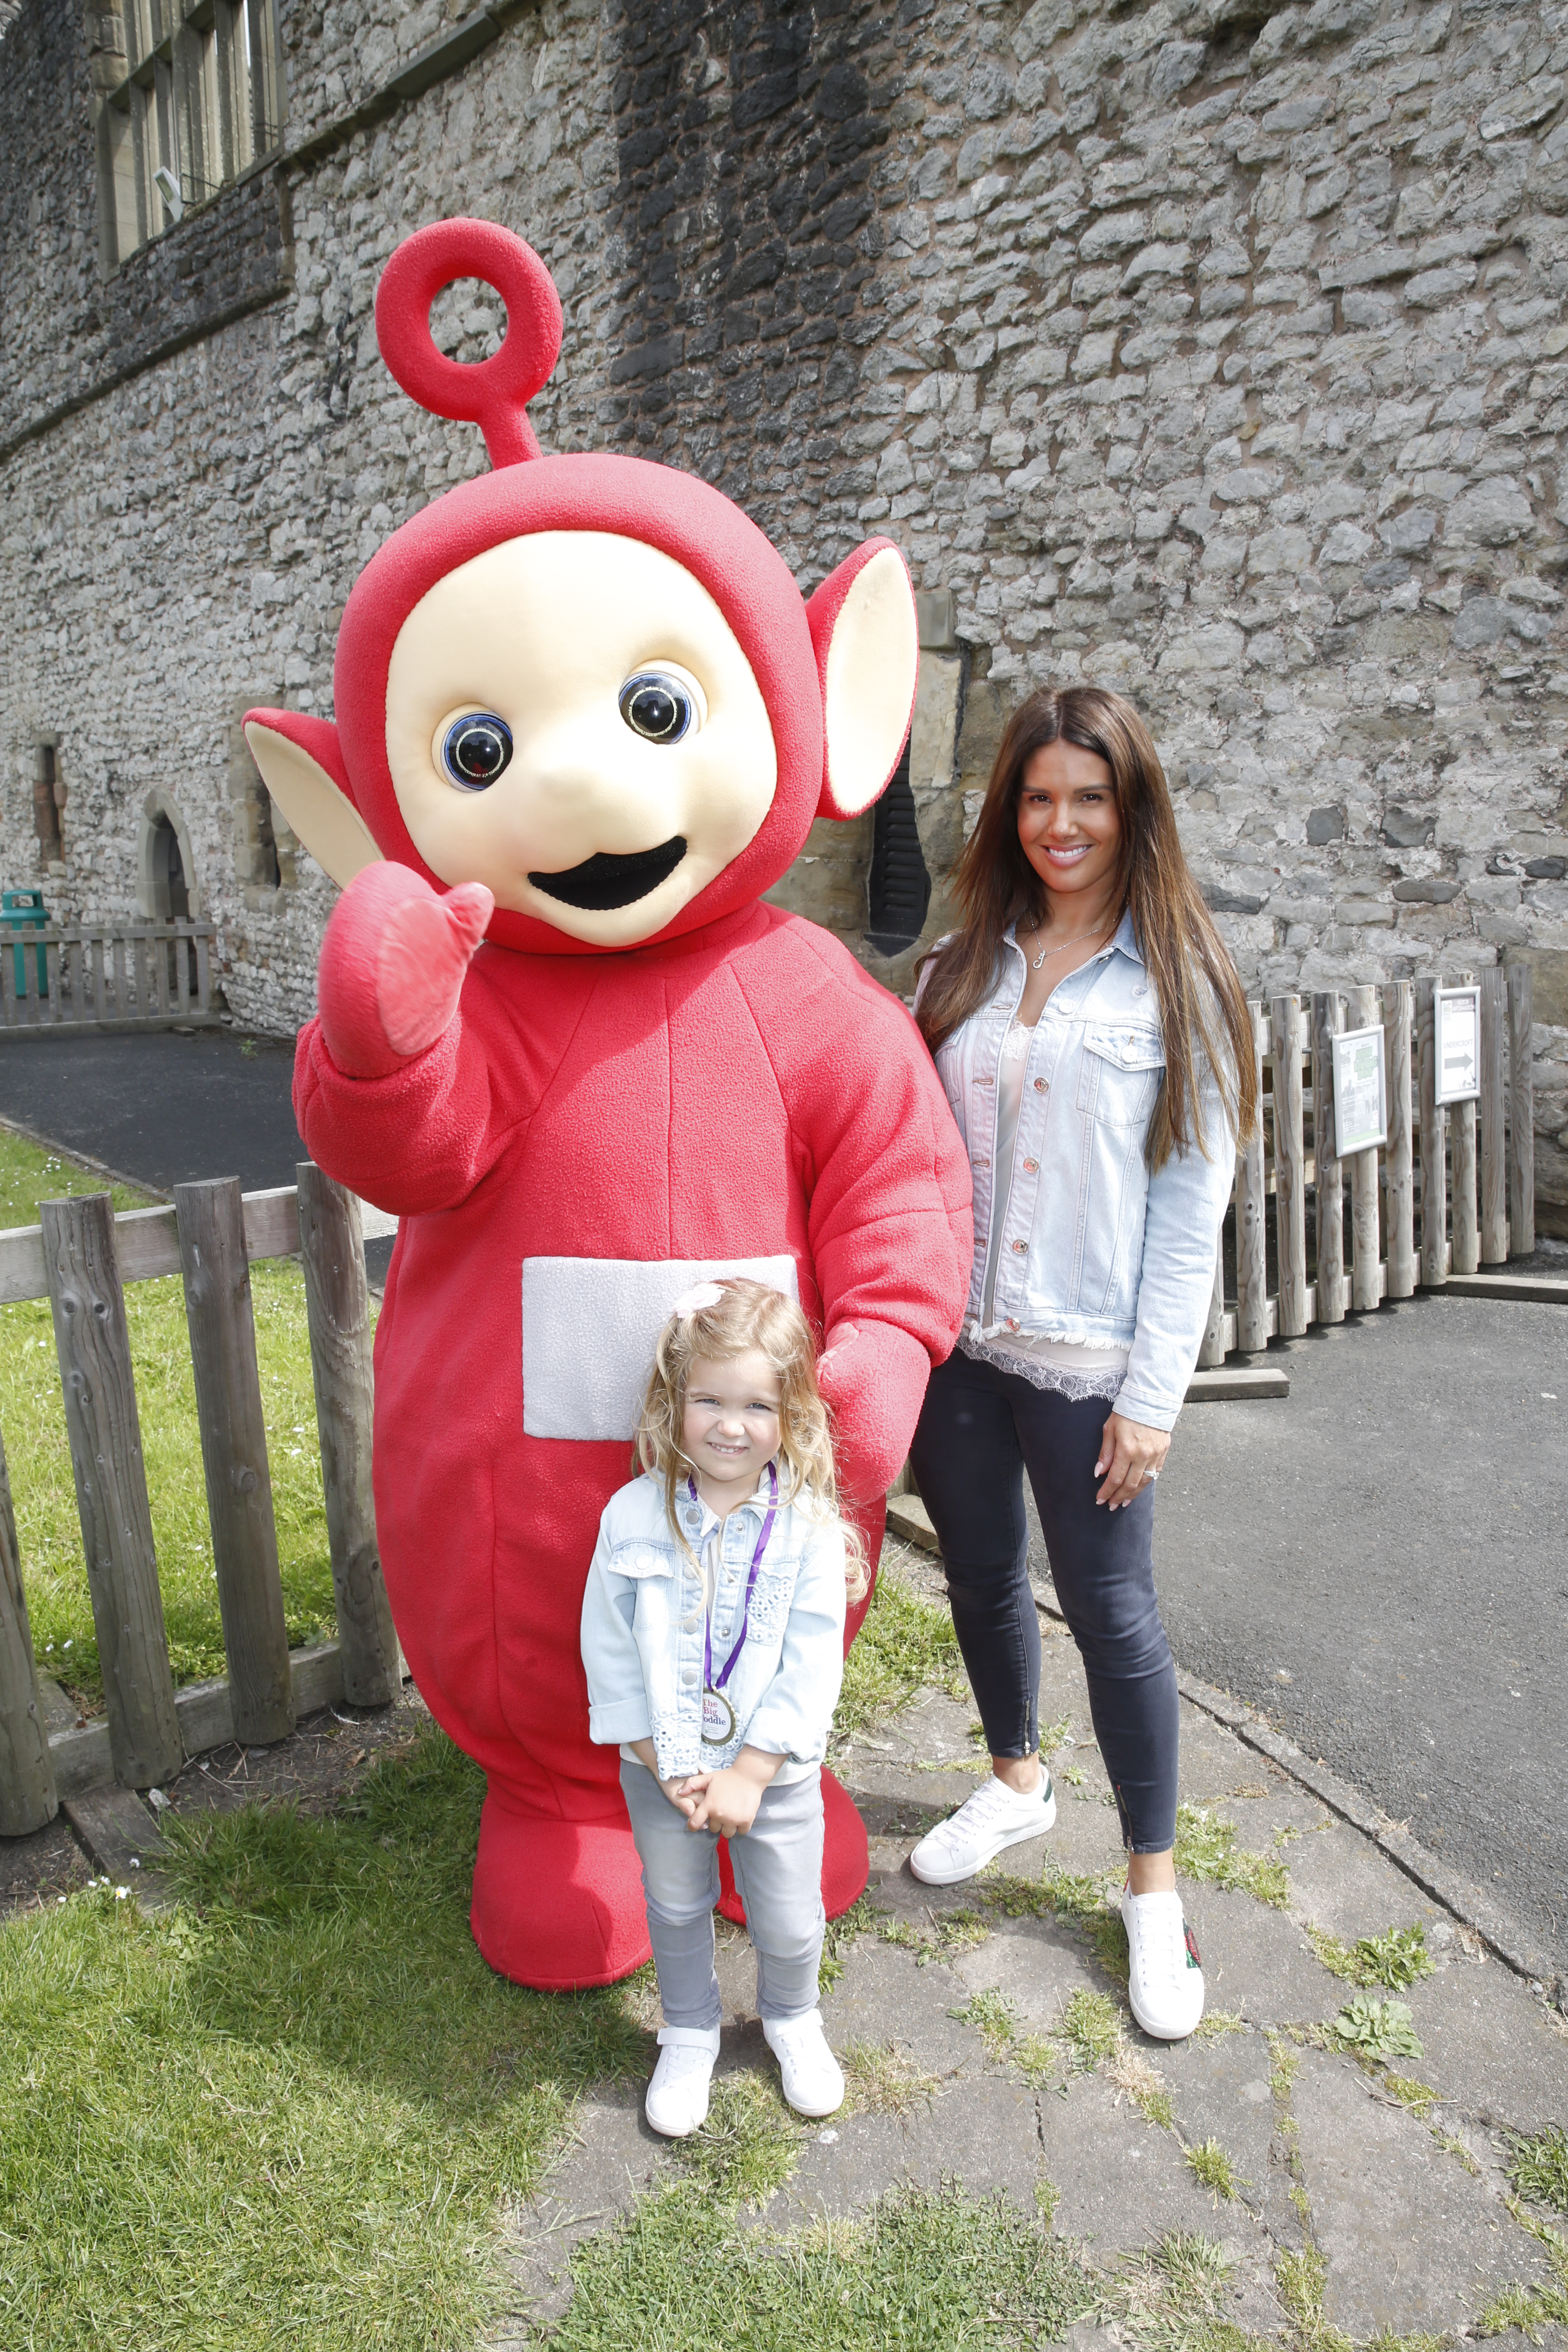 Rebekah Vardy toddles with the Teletubbies